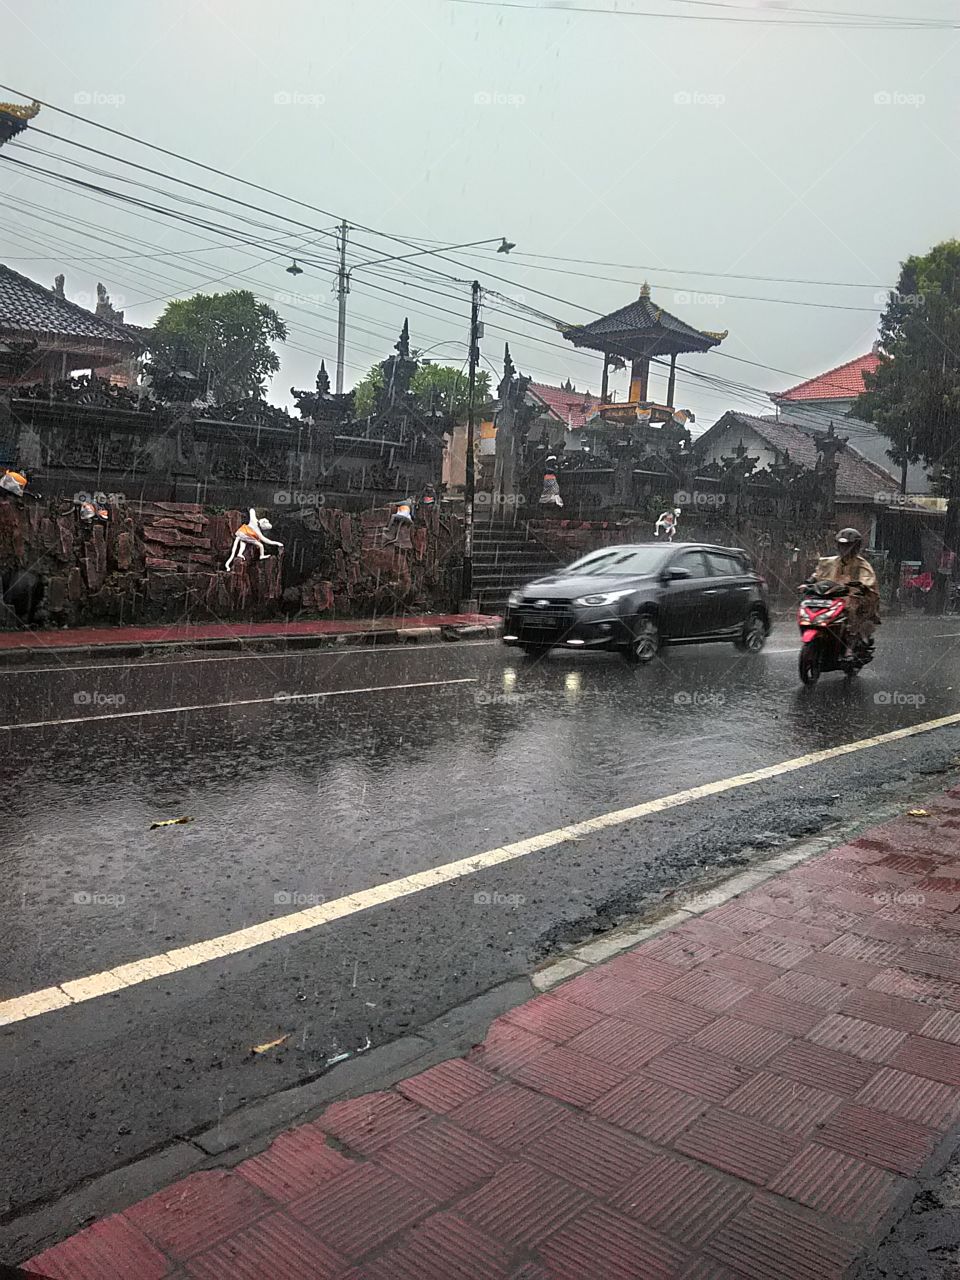 RAIN AND THE WEATHER